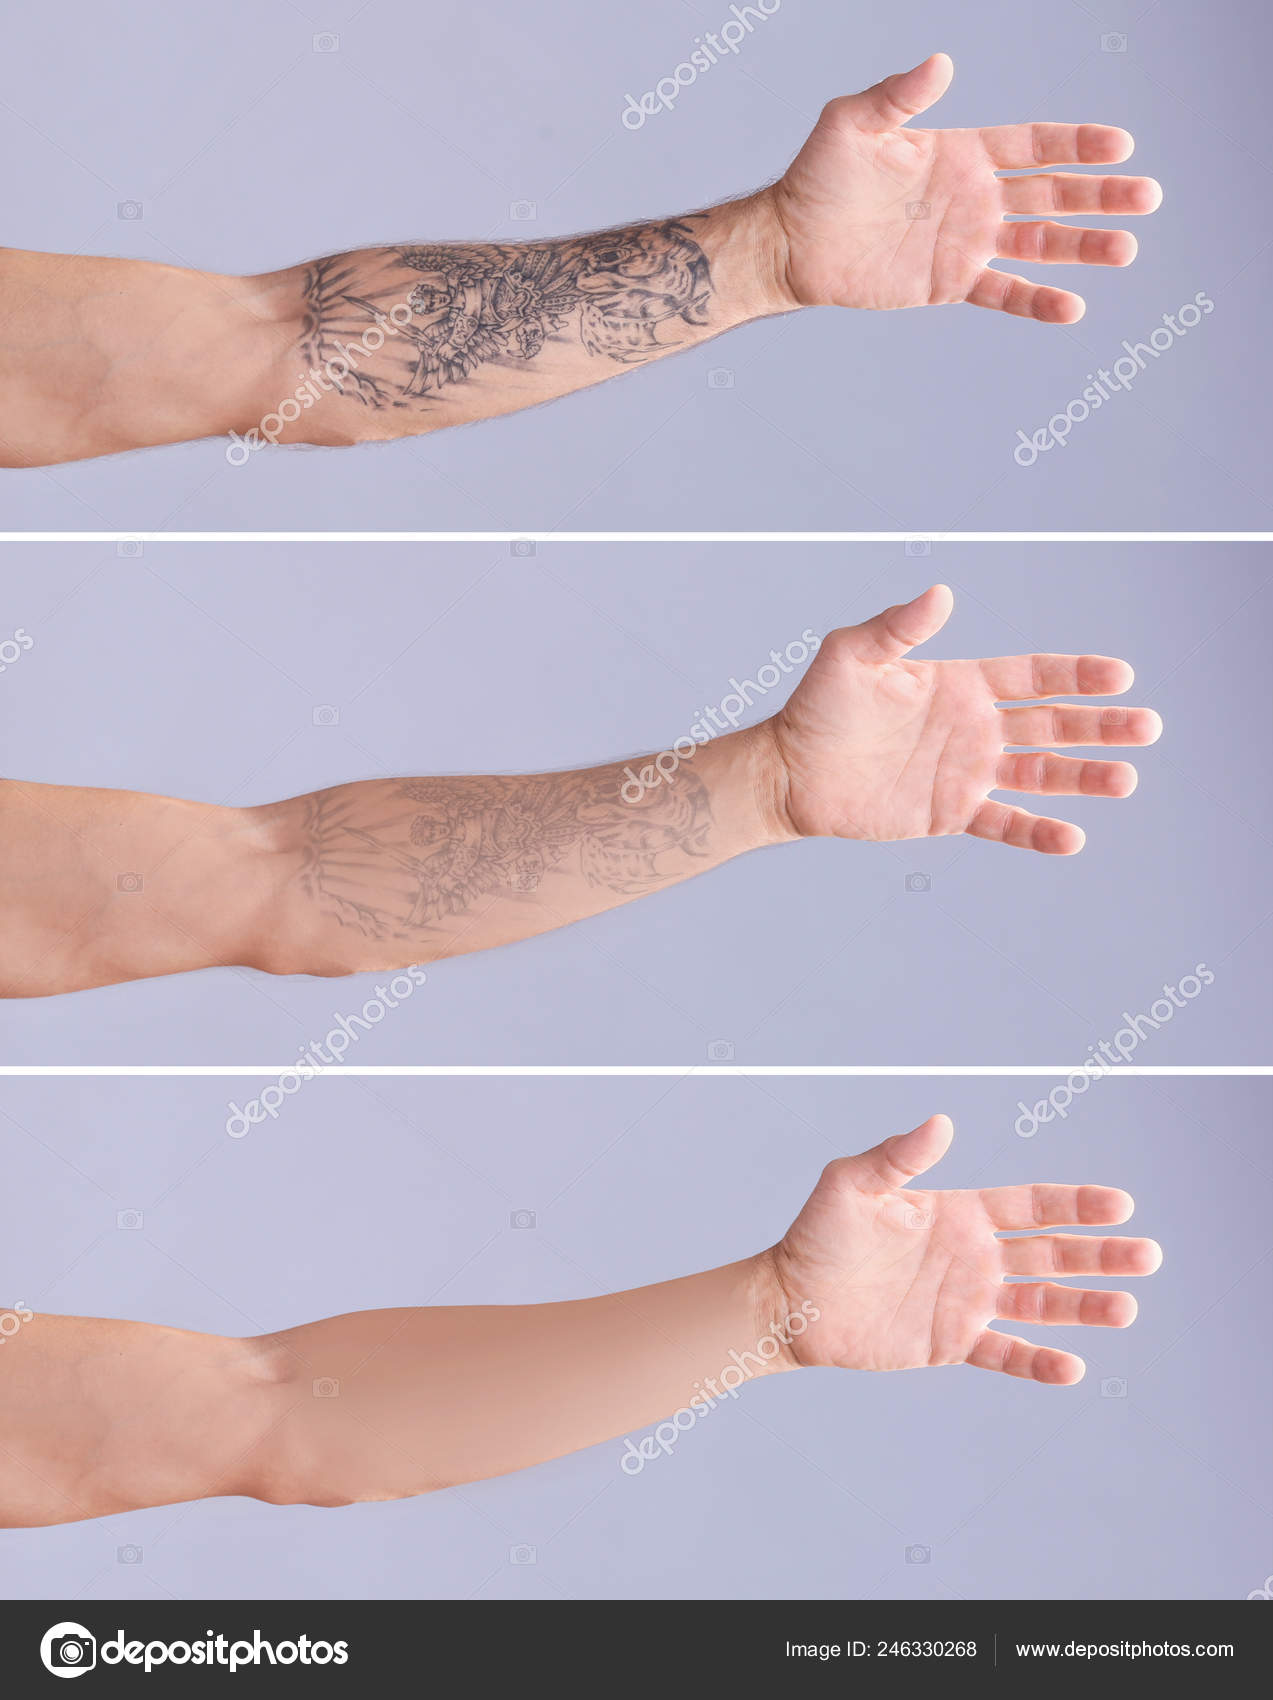 Marty Byars hand before laser removal treatment at the office of A Doors  Open a laser tattoo removal treatment nonprofit that specializes in  reentry for ex offenders on Sunday Dec 11 2016  